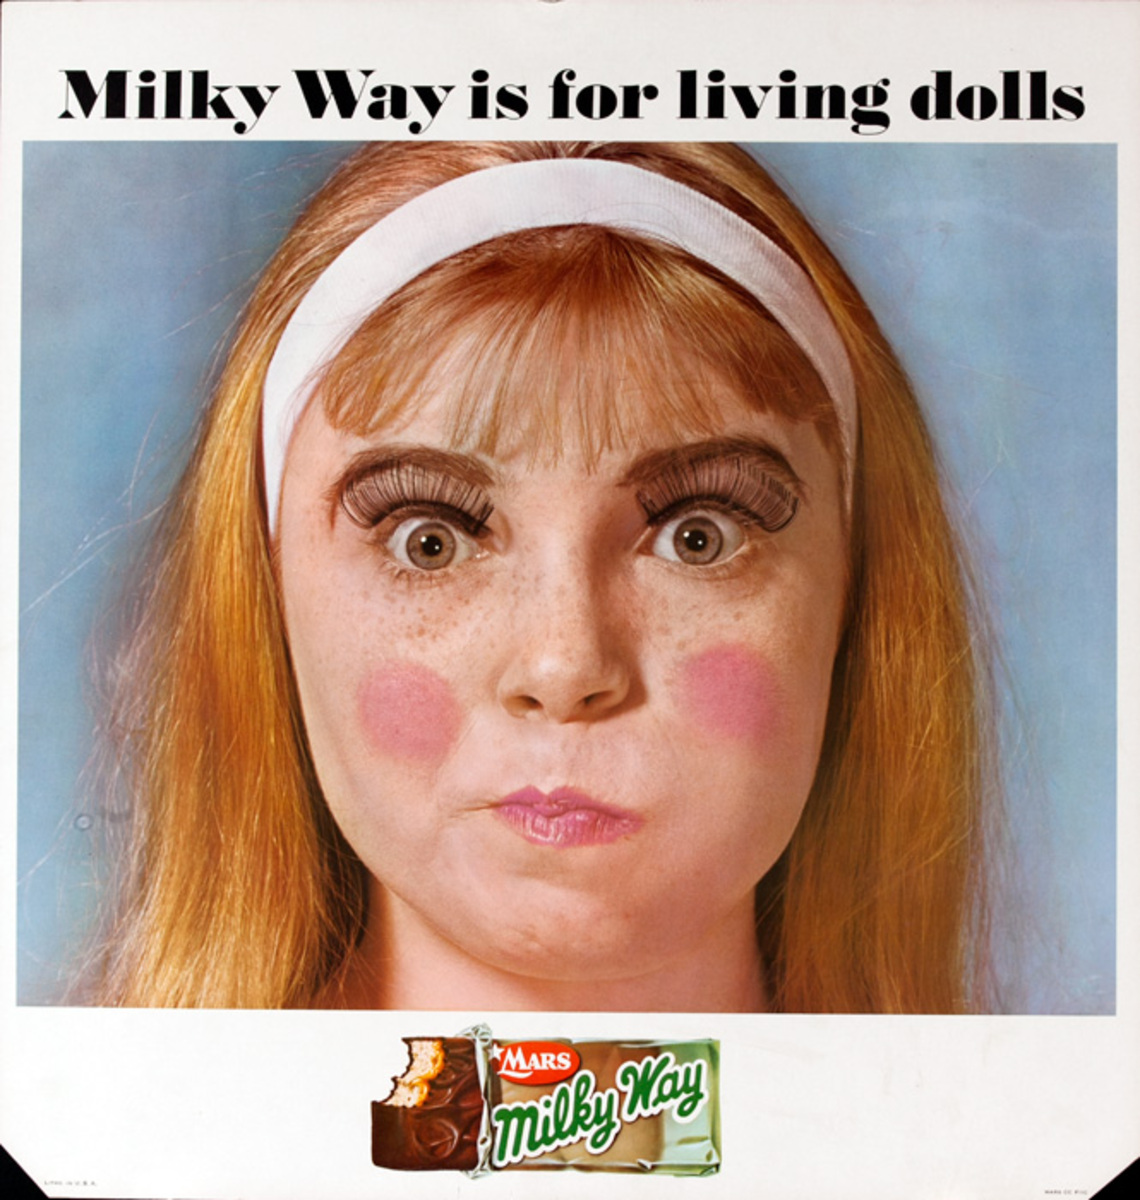 Mars Candy Original Advertising Poster Milky Way Is For Living Dolls